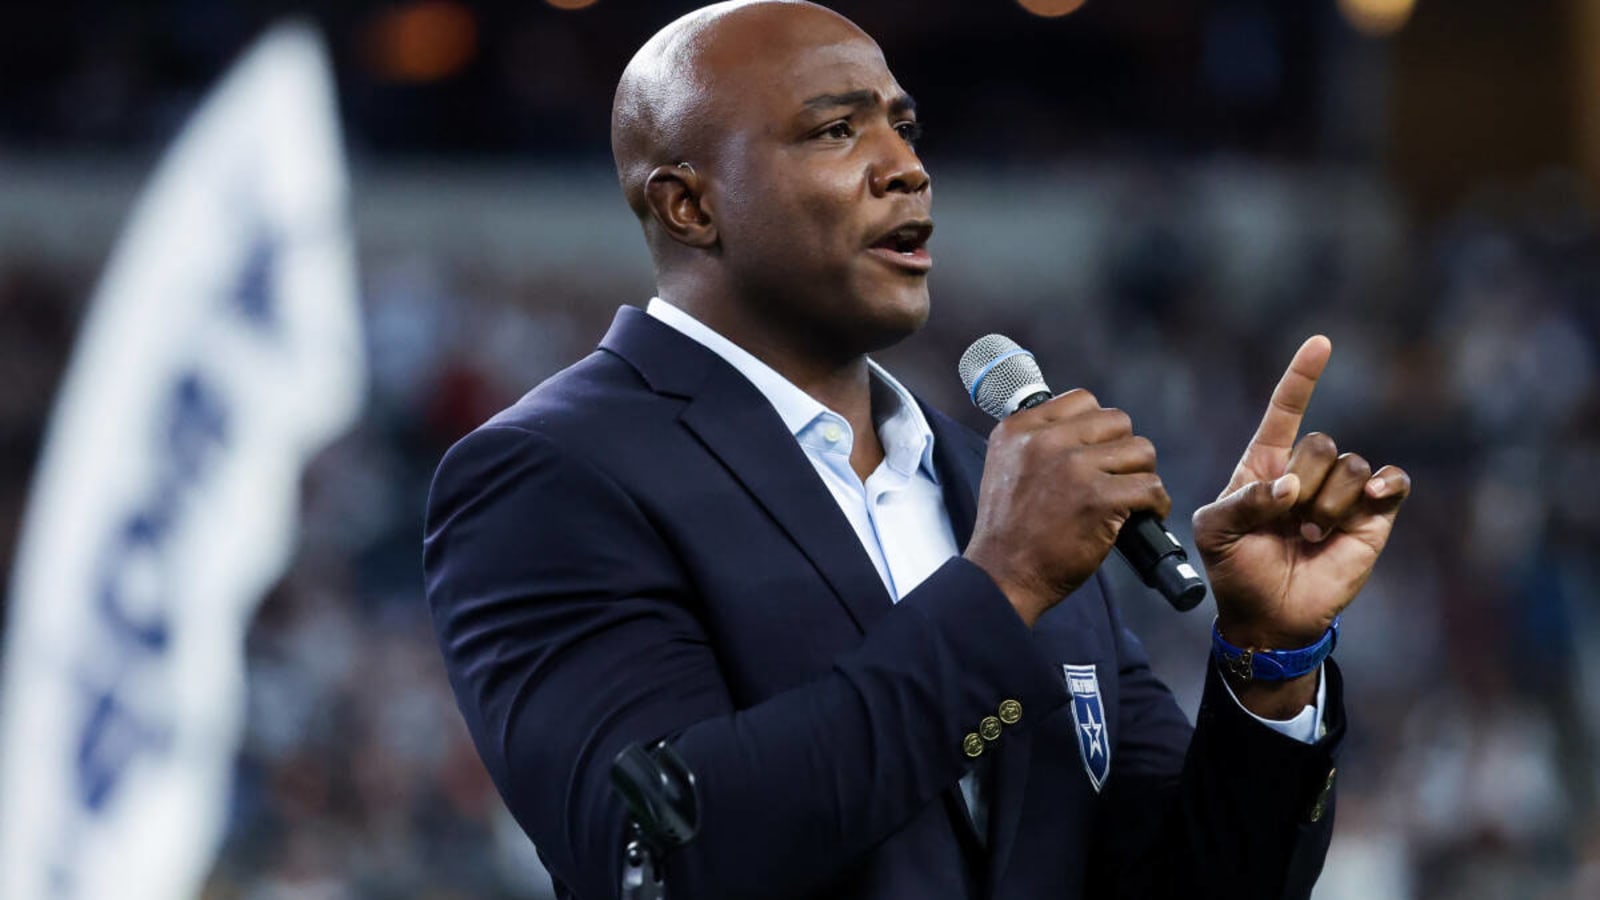 Denver Broncos legend DeMarcus Ware found himself on a singing show and nobody knew it was him